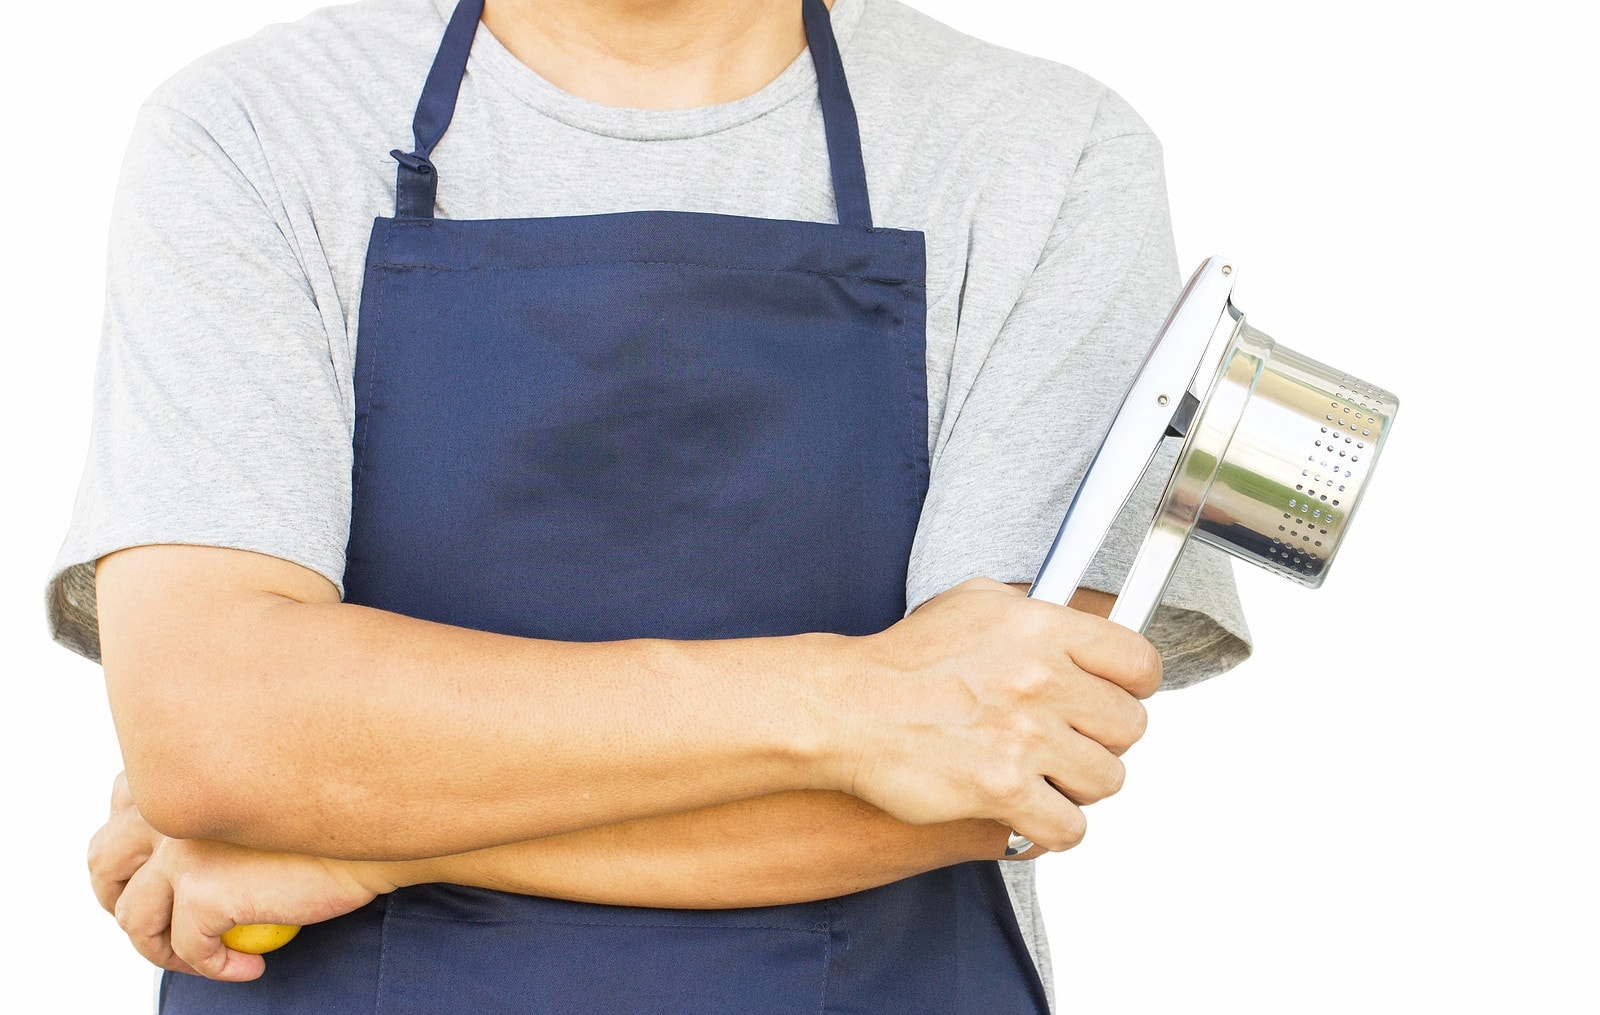 Male chef in blue apron holding a potato ricer